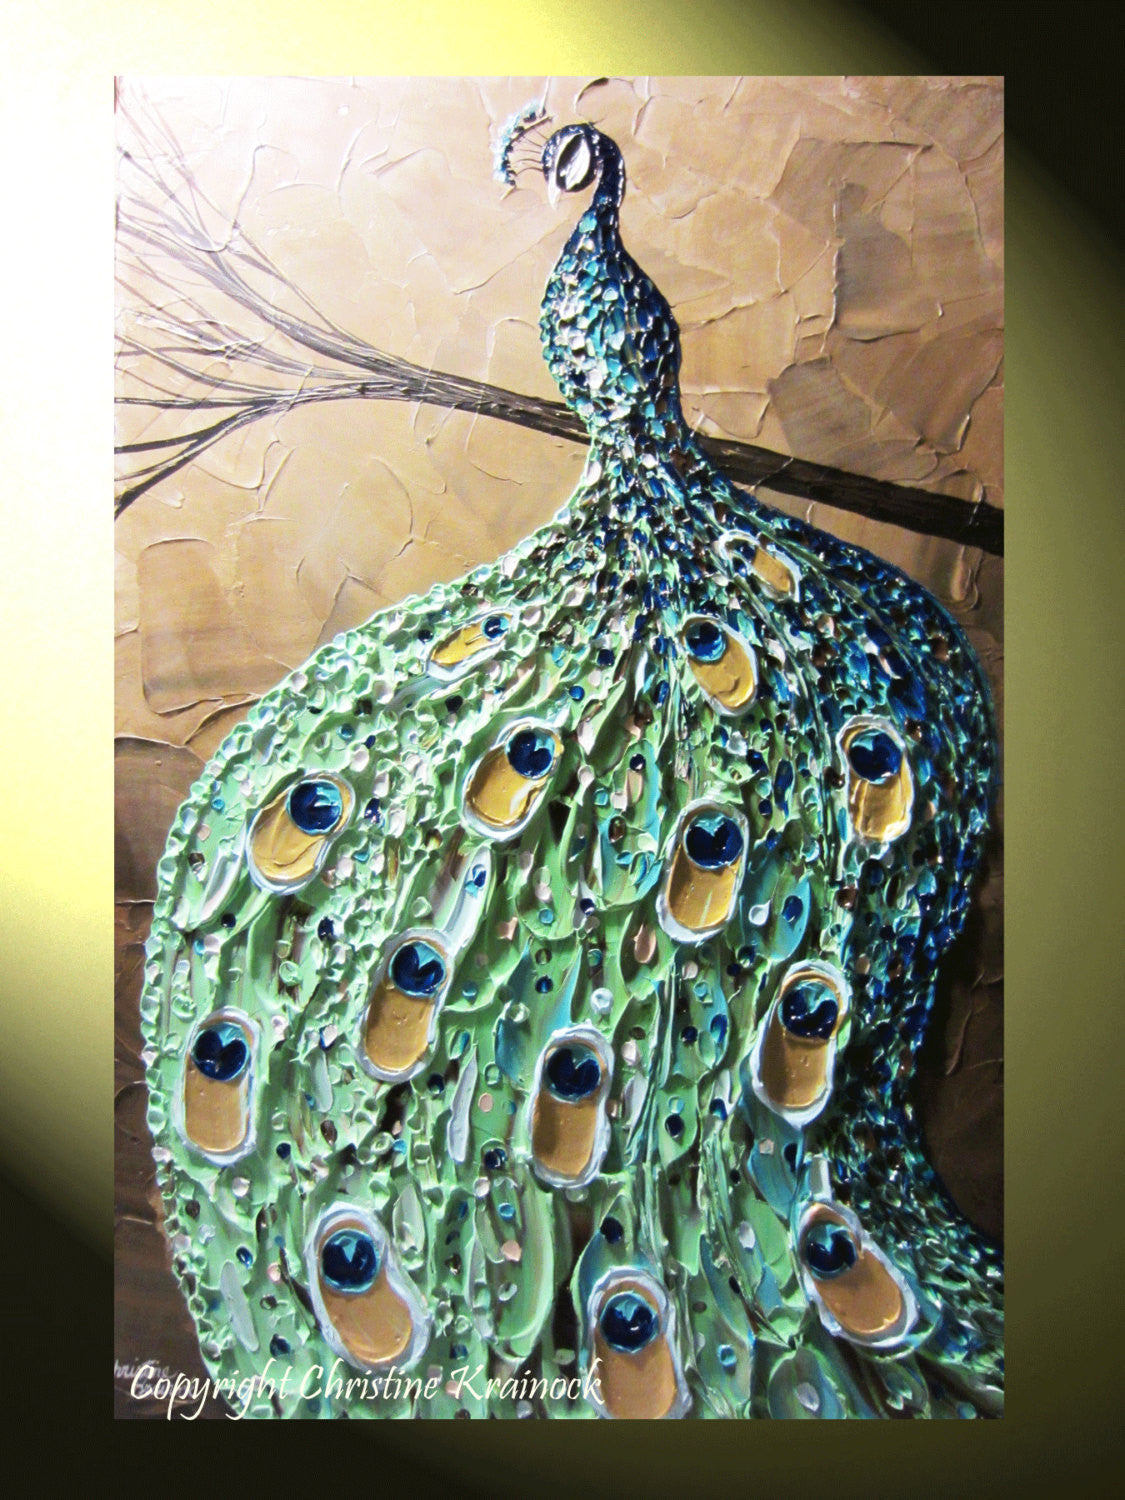 CUSTOM Abstract Painting Peacock Textured Contemporary Art Blue Green Gold MADE to ORDER - Christine Krainock Art - Contemporary Art by Christine - 4